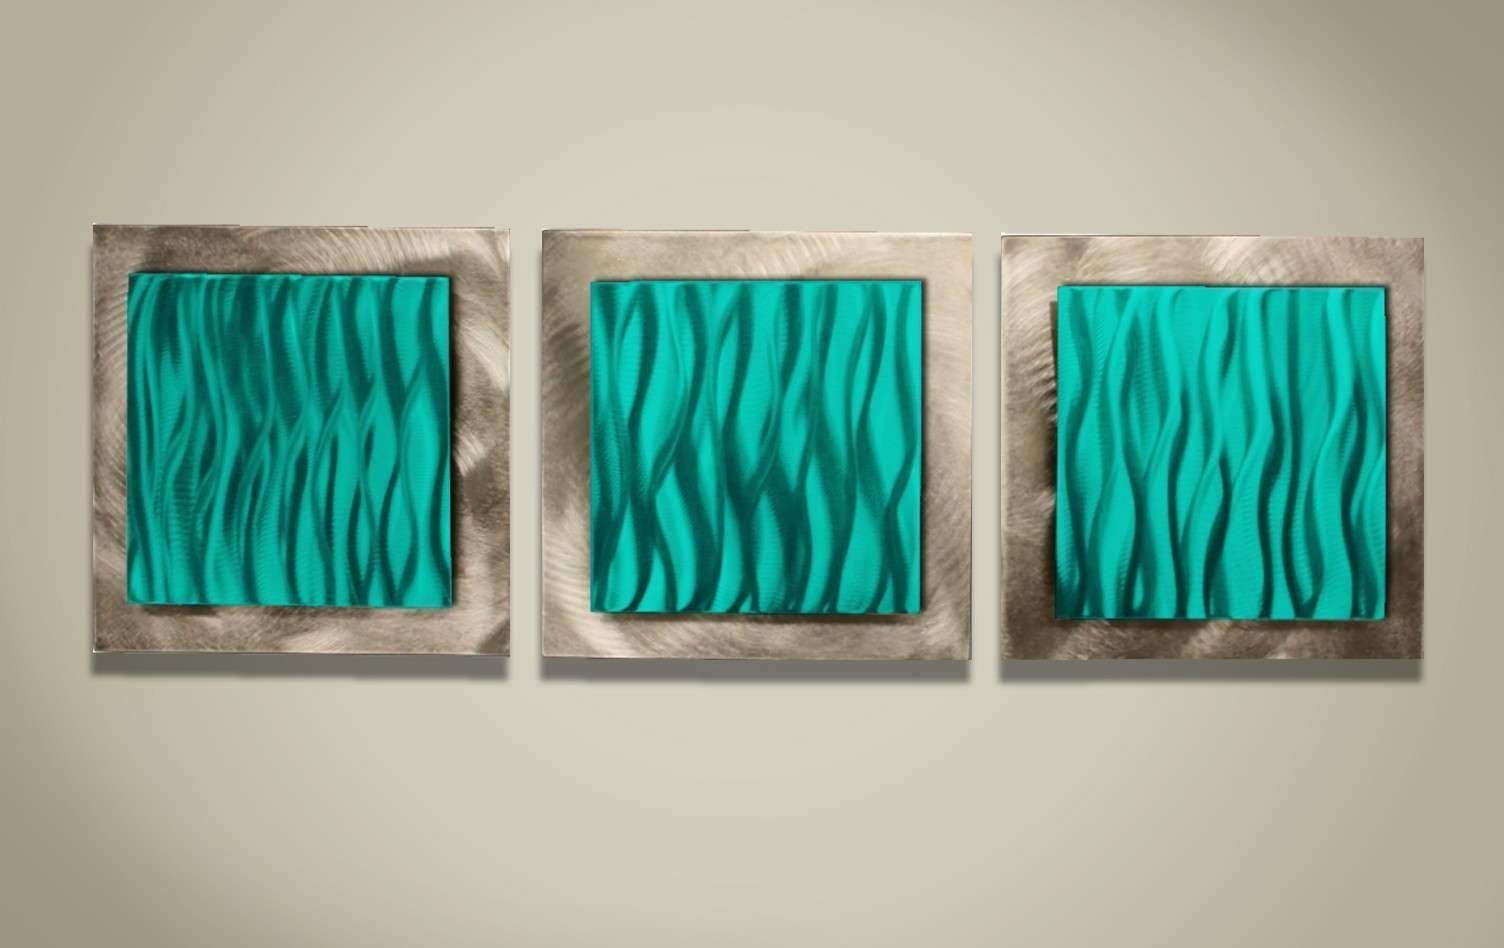 Turquoise And Brown Wall Decor Luxury Wall Art Ideas Design Teal Pertaining To Teal And Brown Wall Art (View 4 of 20)